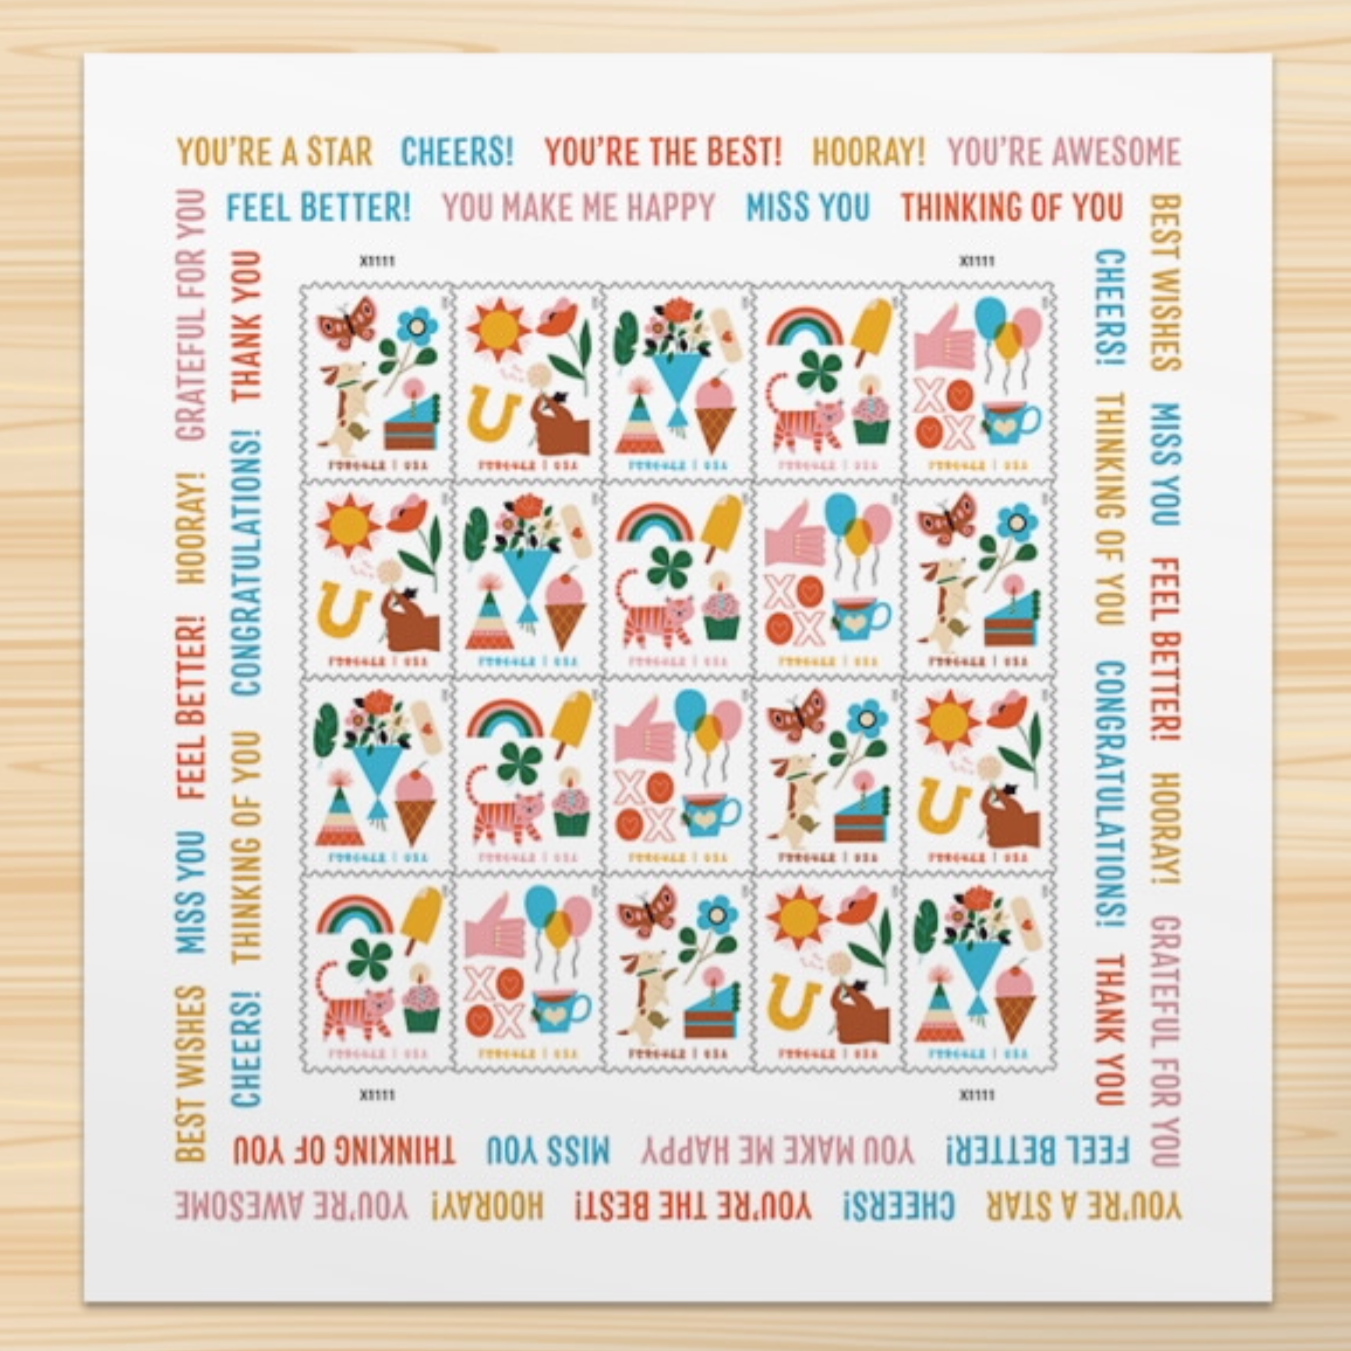 USPS Postage Stamps (Sheets in Multiple Designs)